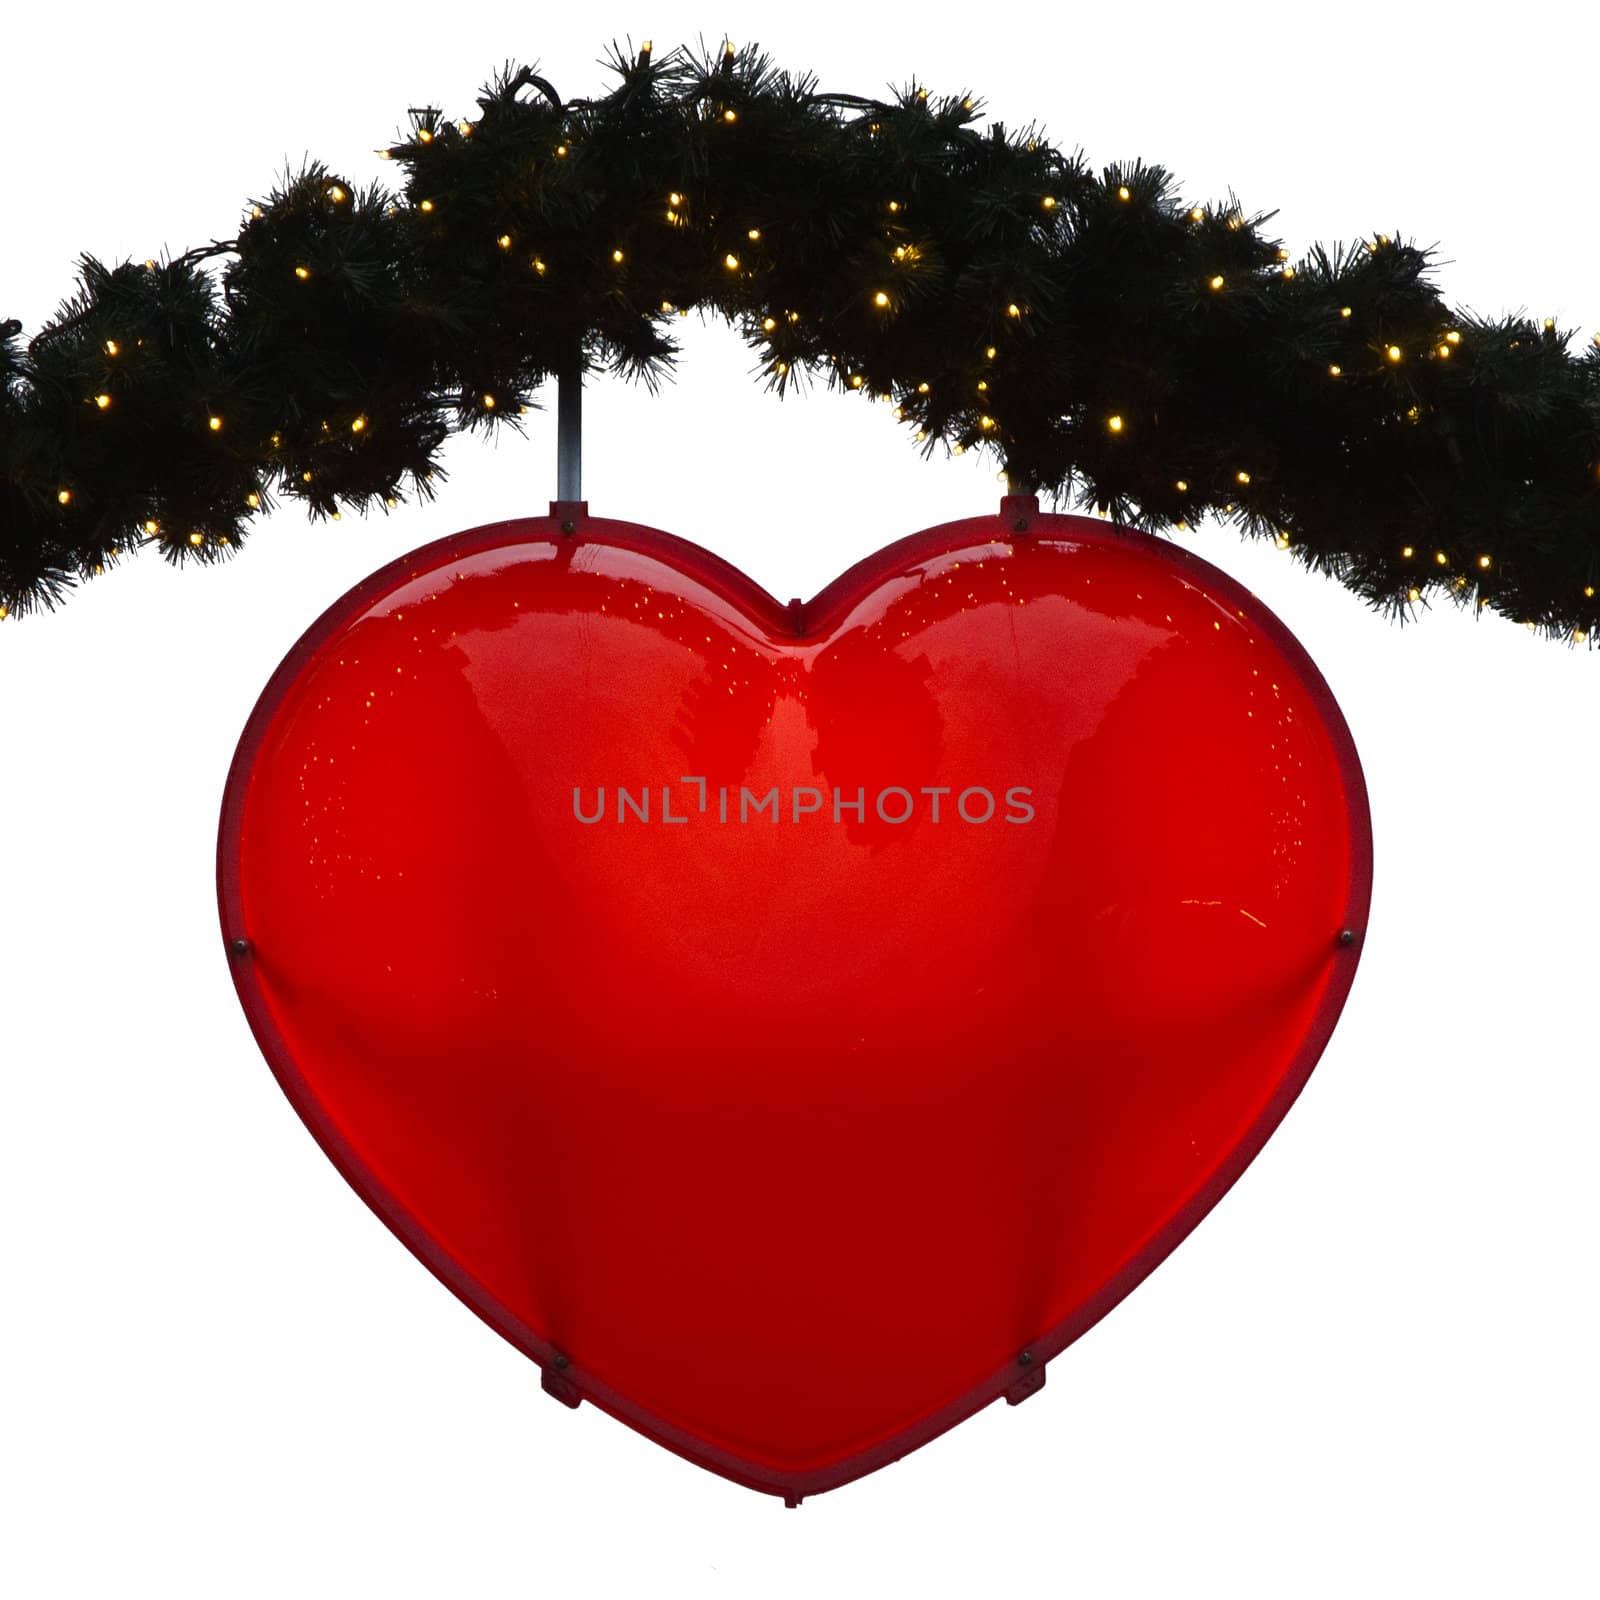 red heart connected to green branches with small lights on white ground